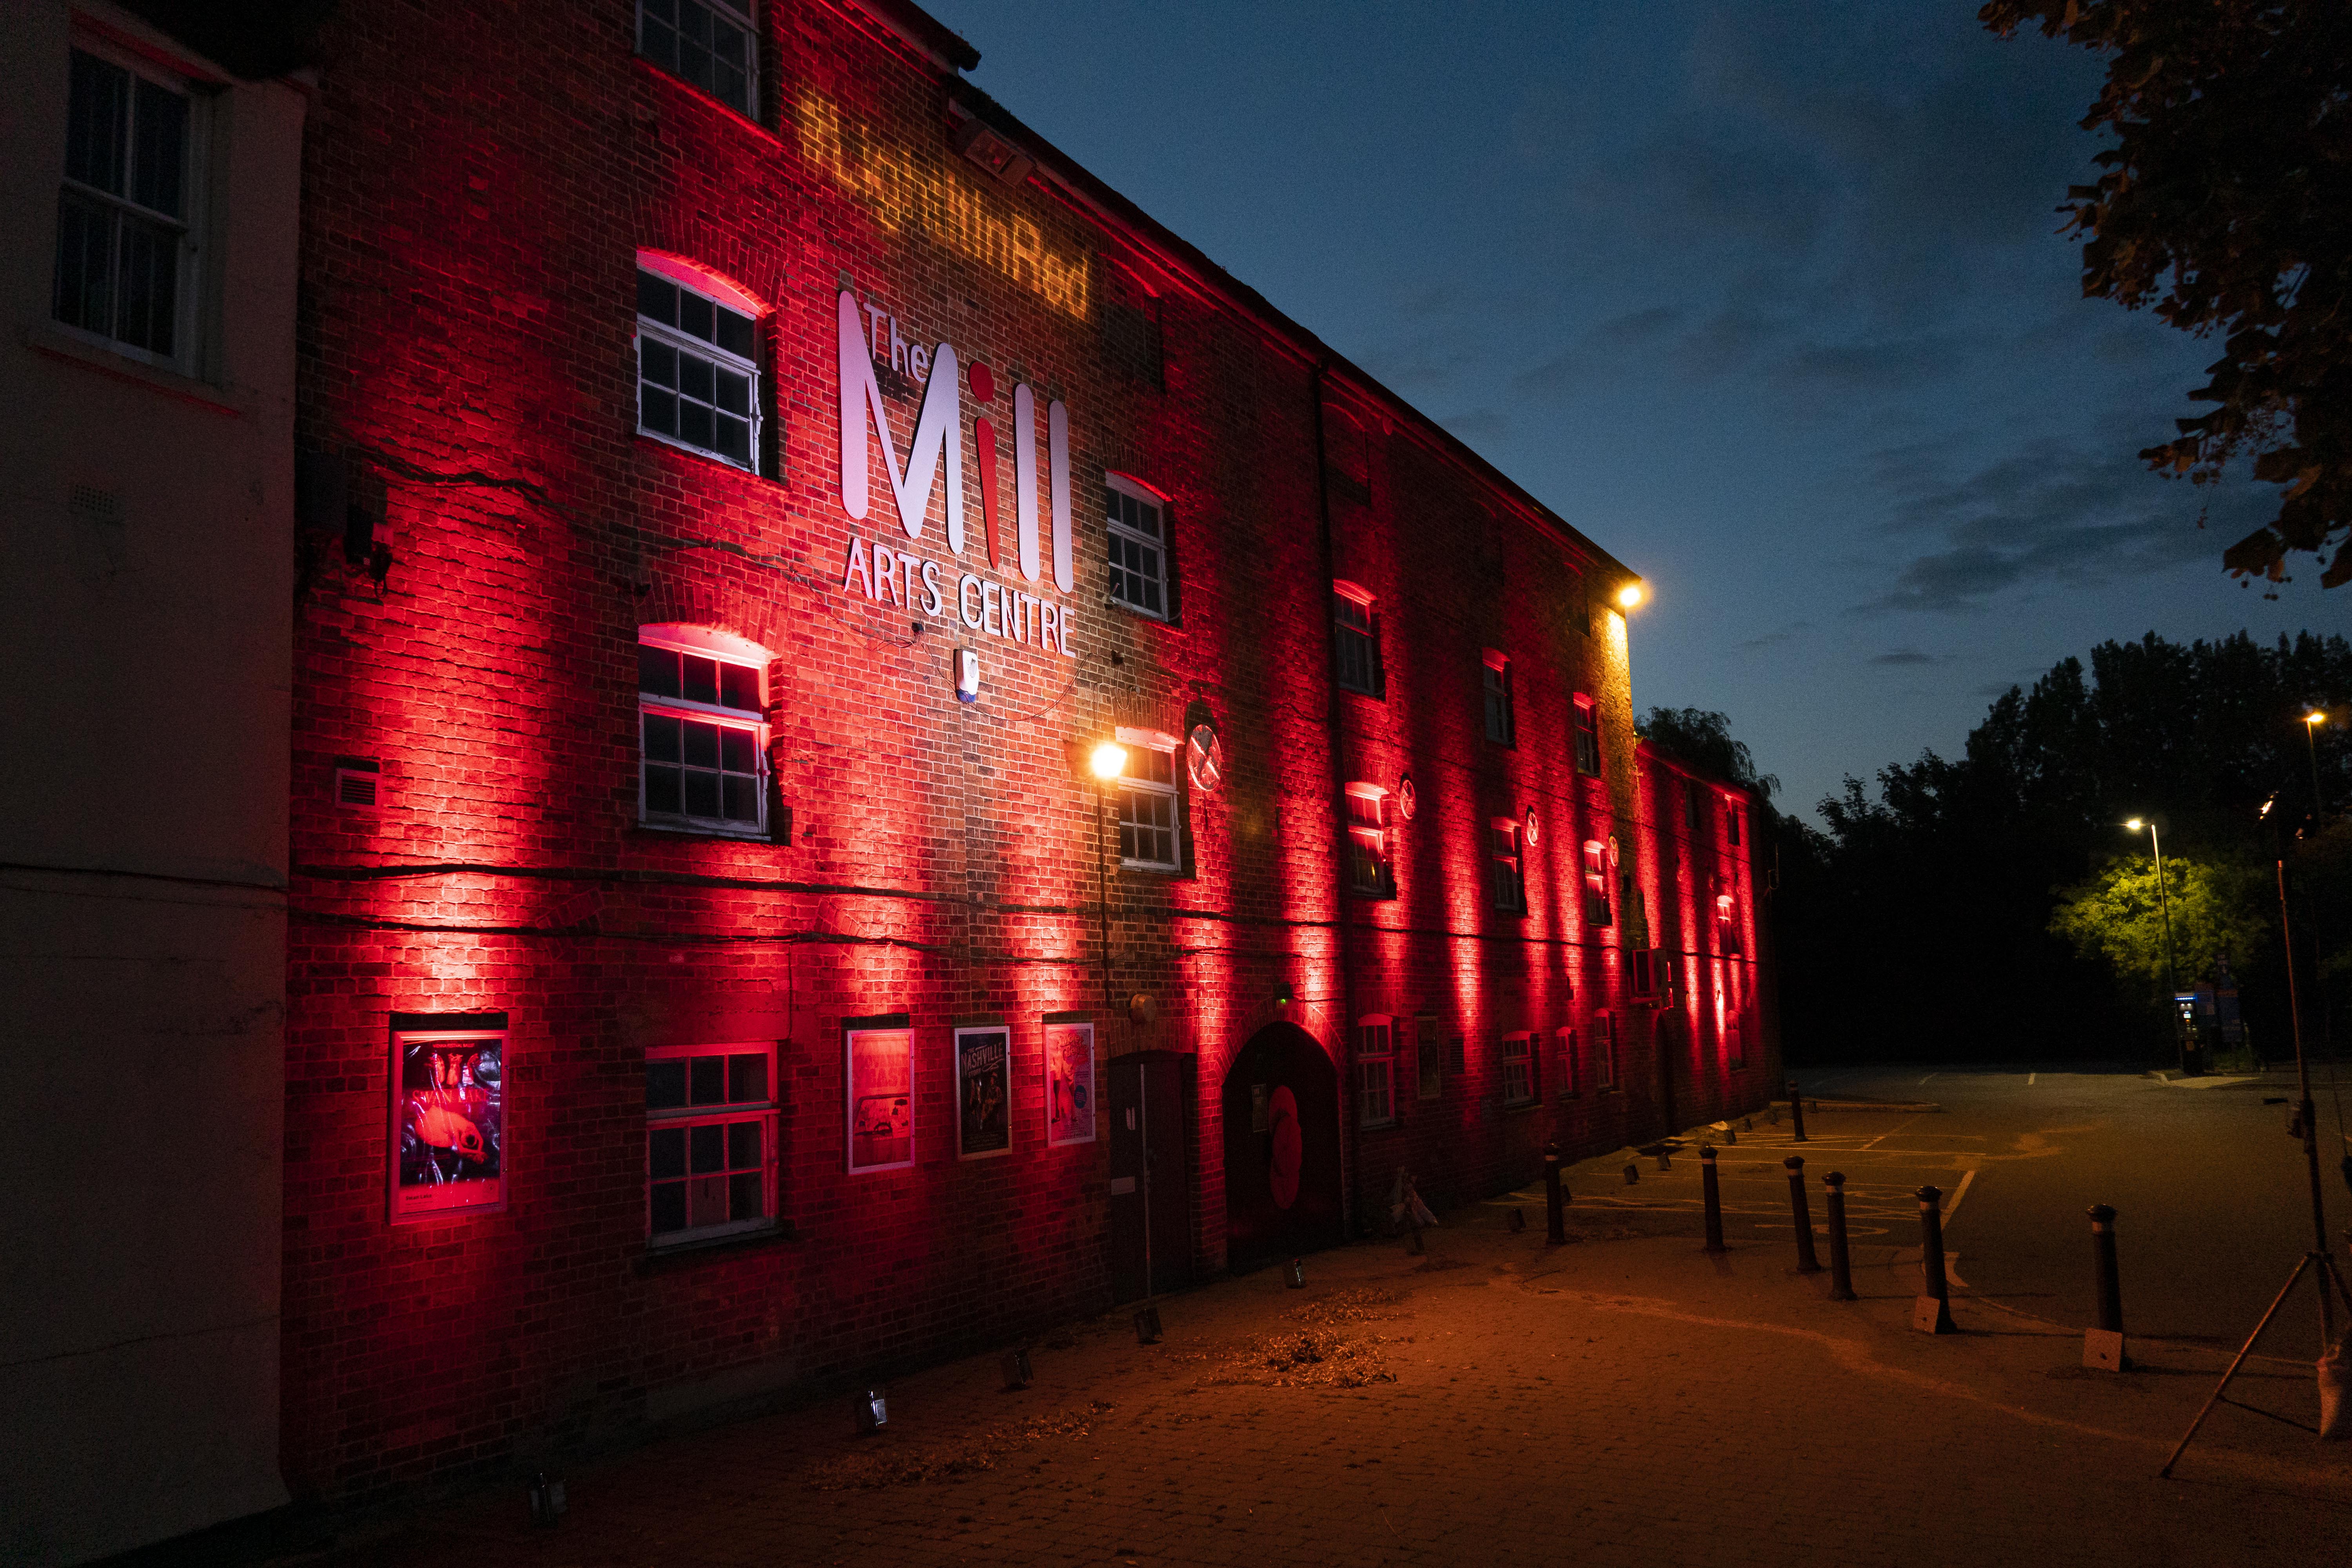 Exterior of The Mill building lit up in red